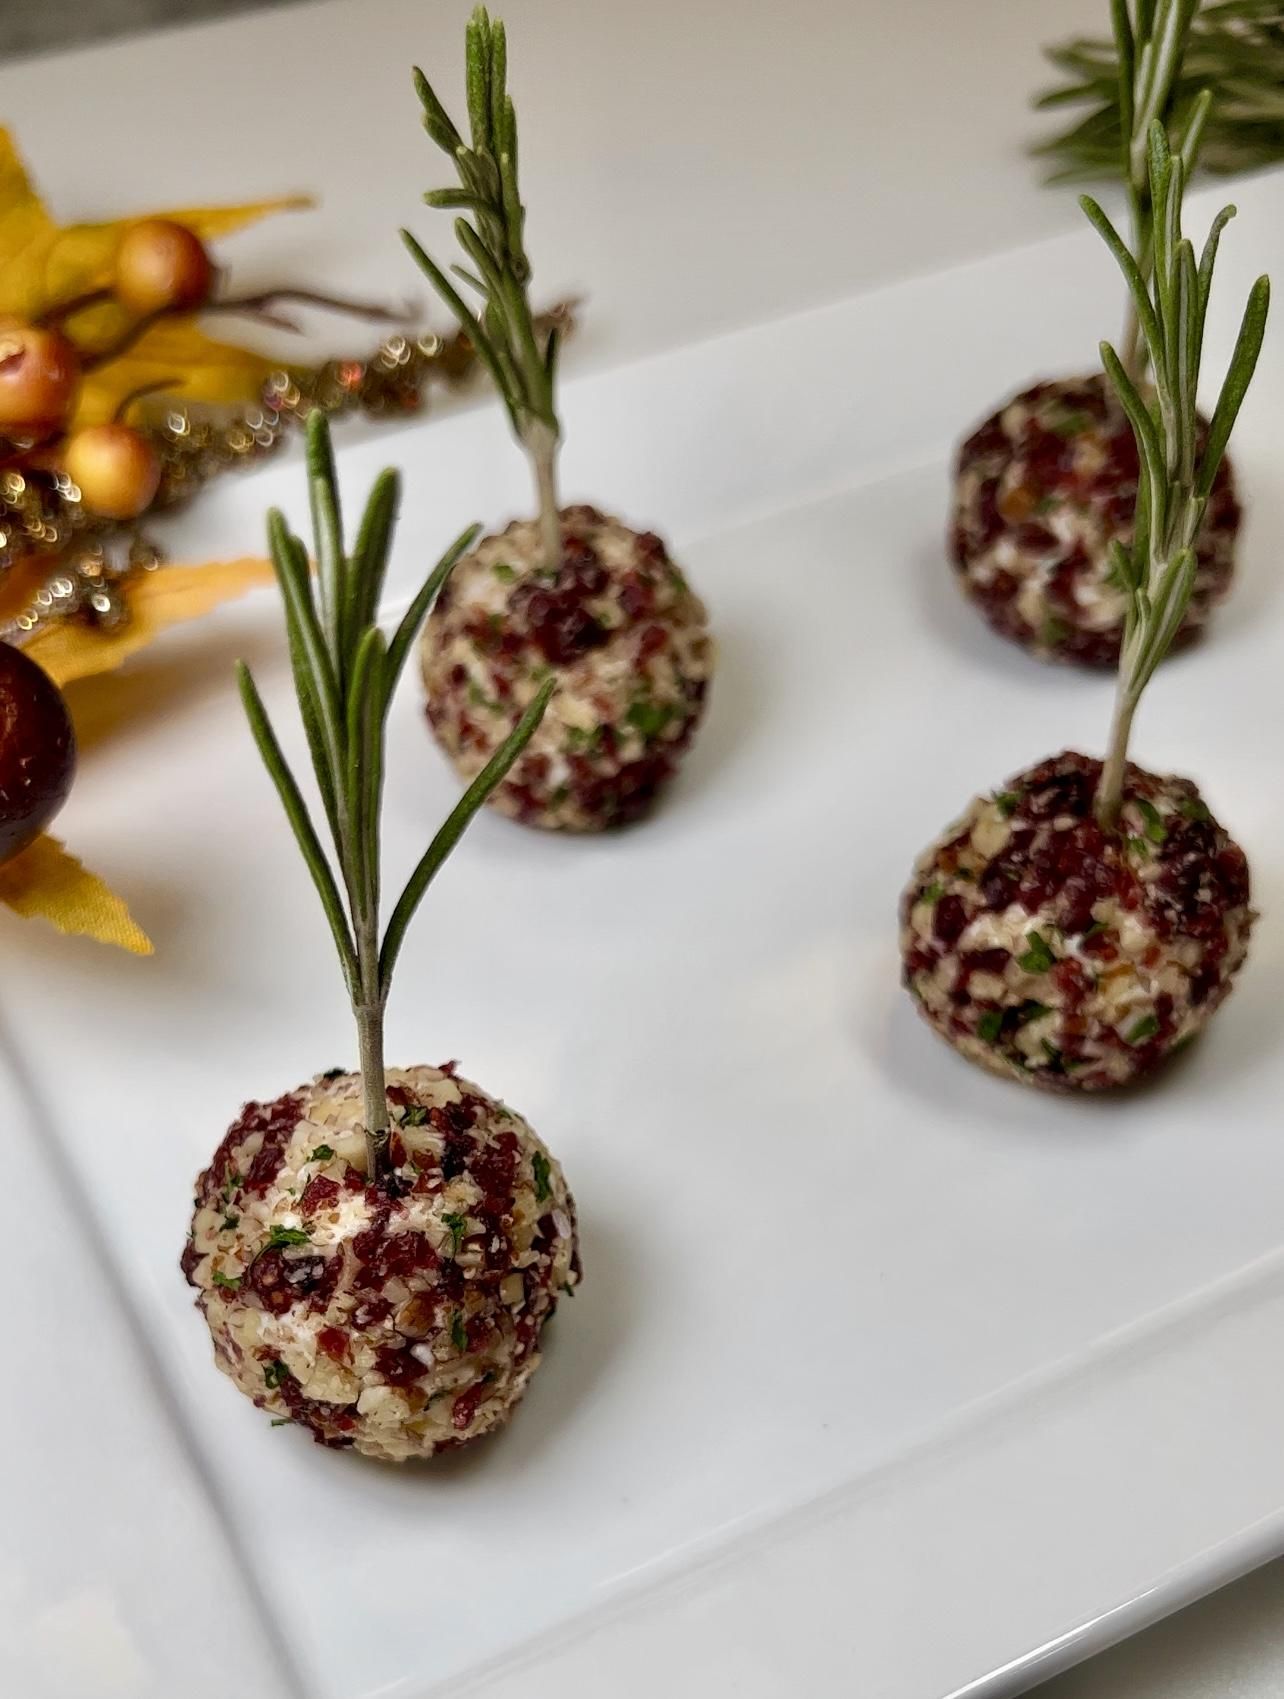 5 Passed Hors-d'Oeuvres Ideas for Your Next Dinner Party